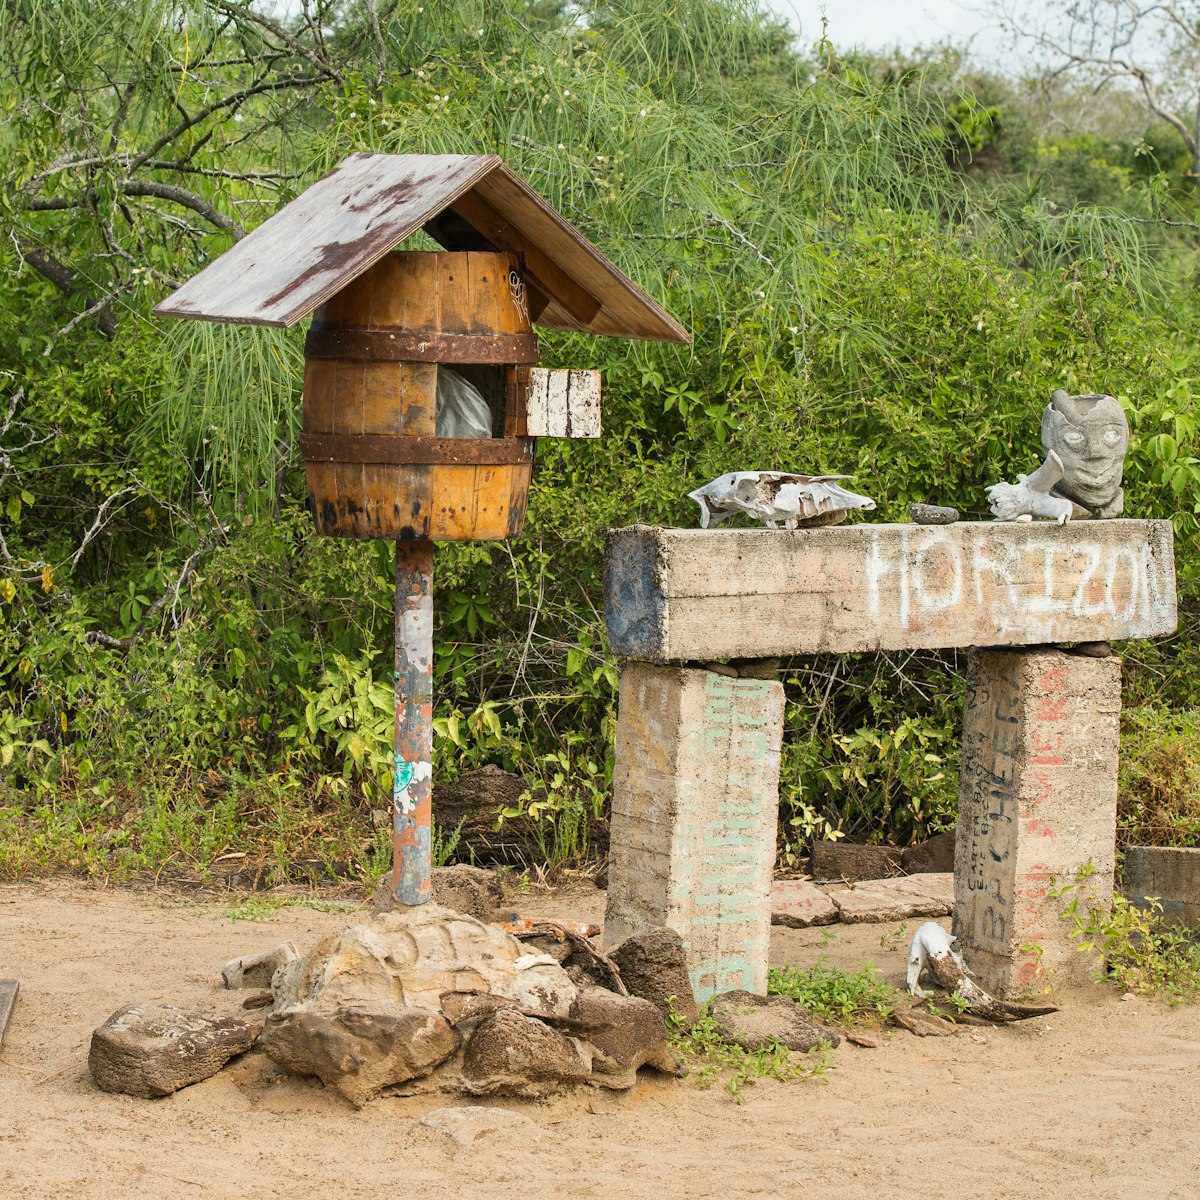 Mail box in Post Office Bay, Floreana Island, Galapagos.